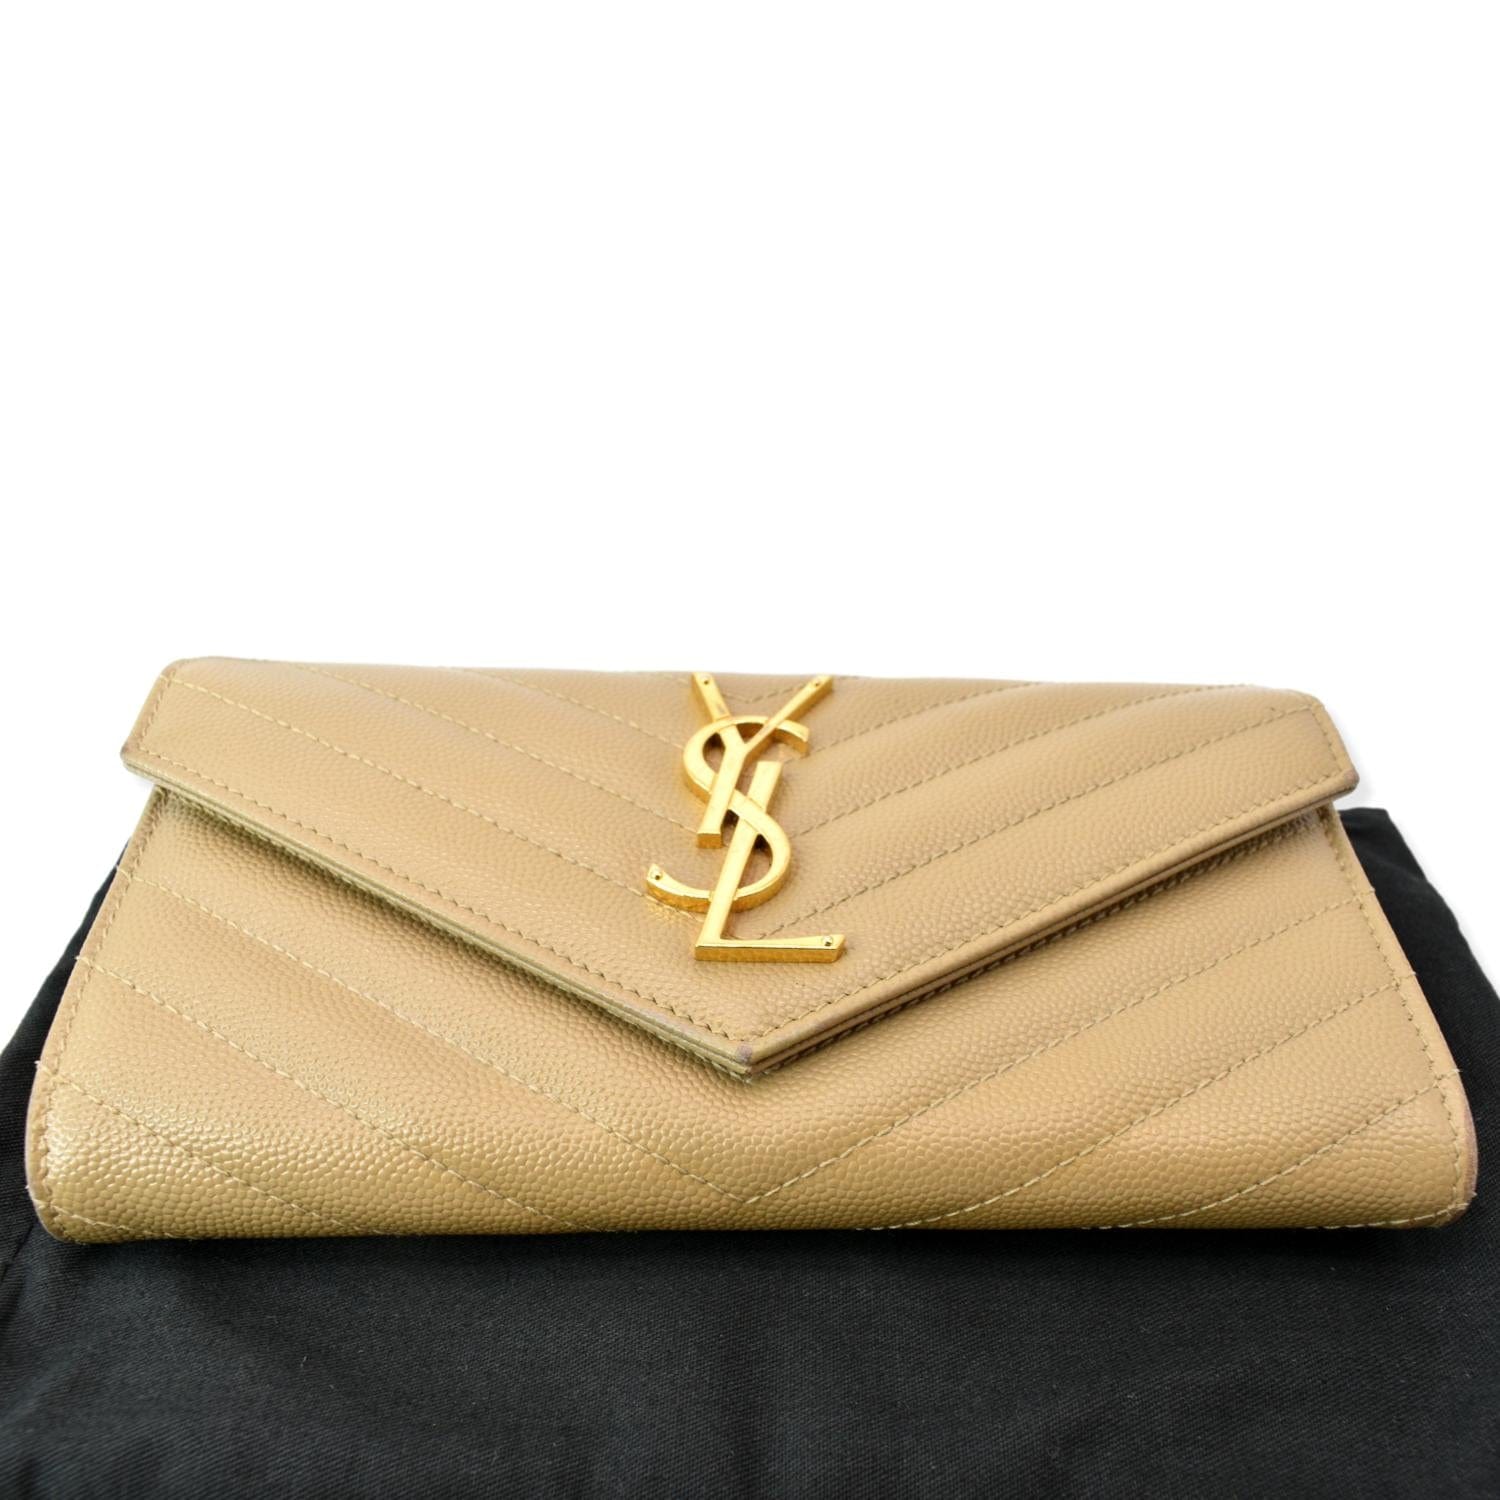 Only 118.00 usd for YVES SAINT LAURENT Monogram Grain Leather Card Case  Beige Online at the Shop